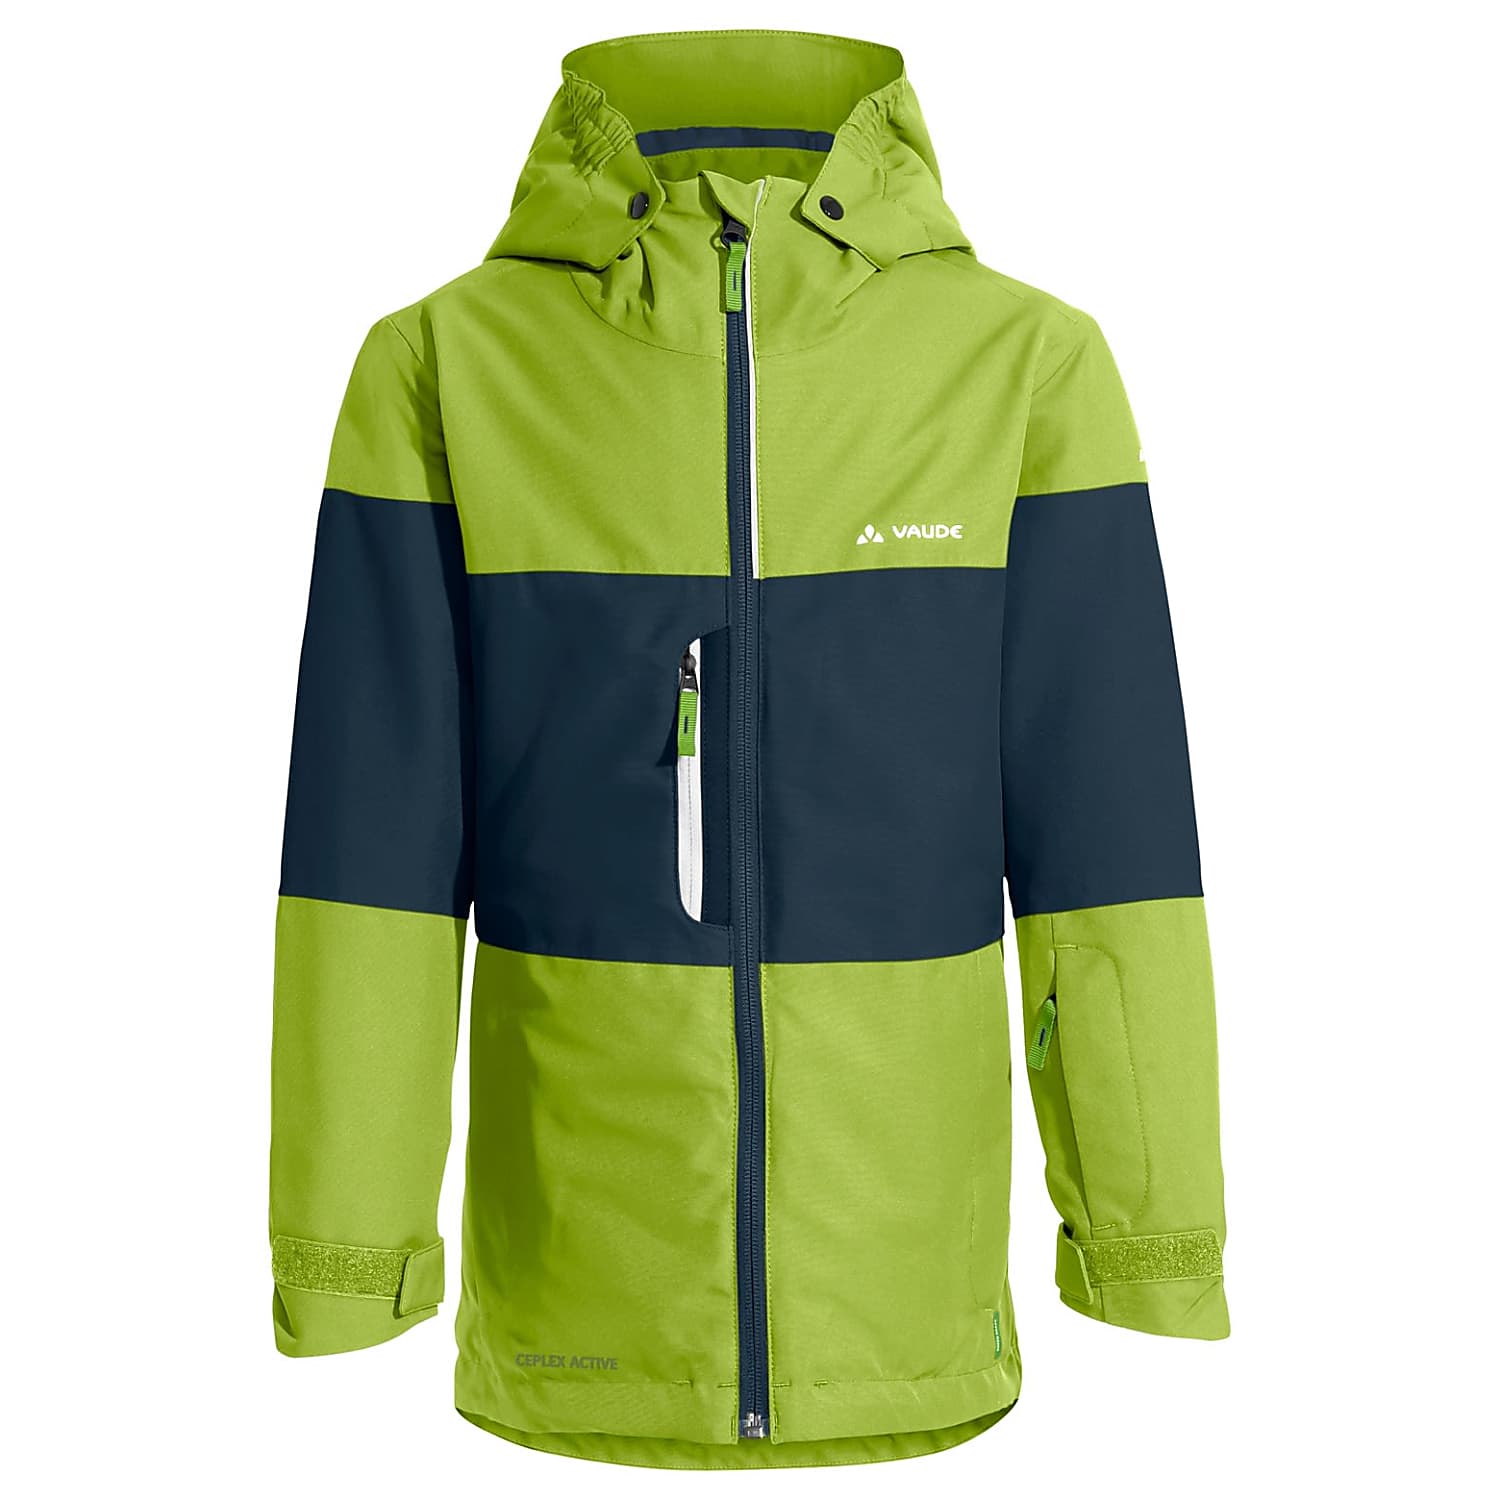 Vaude KIDS SNOW CUP JACKET, - Chute shipping cheap and Green Fast